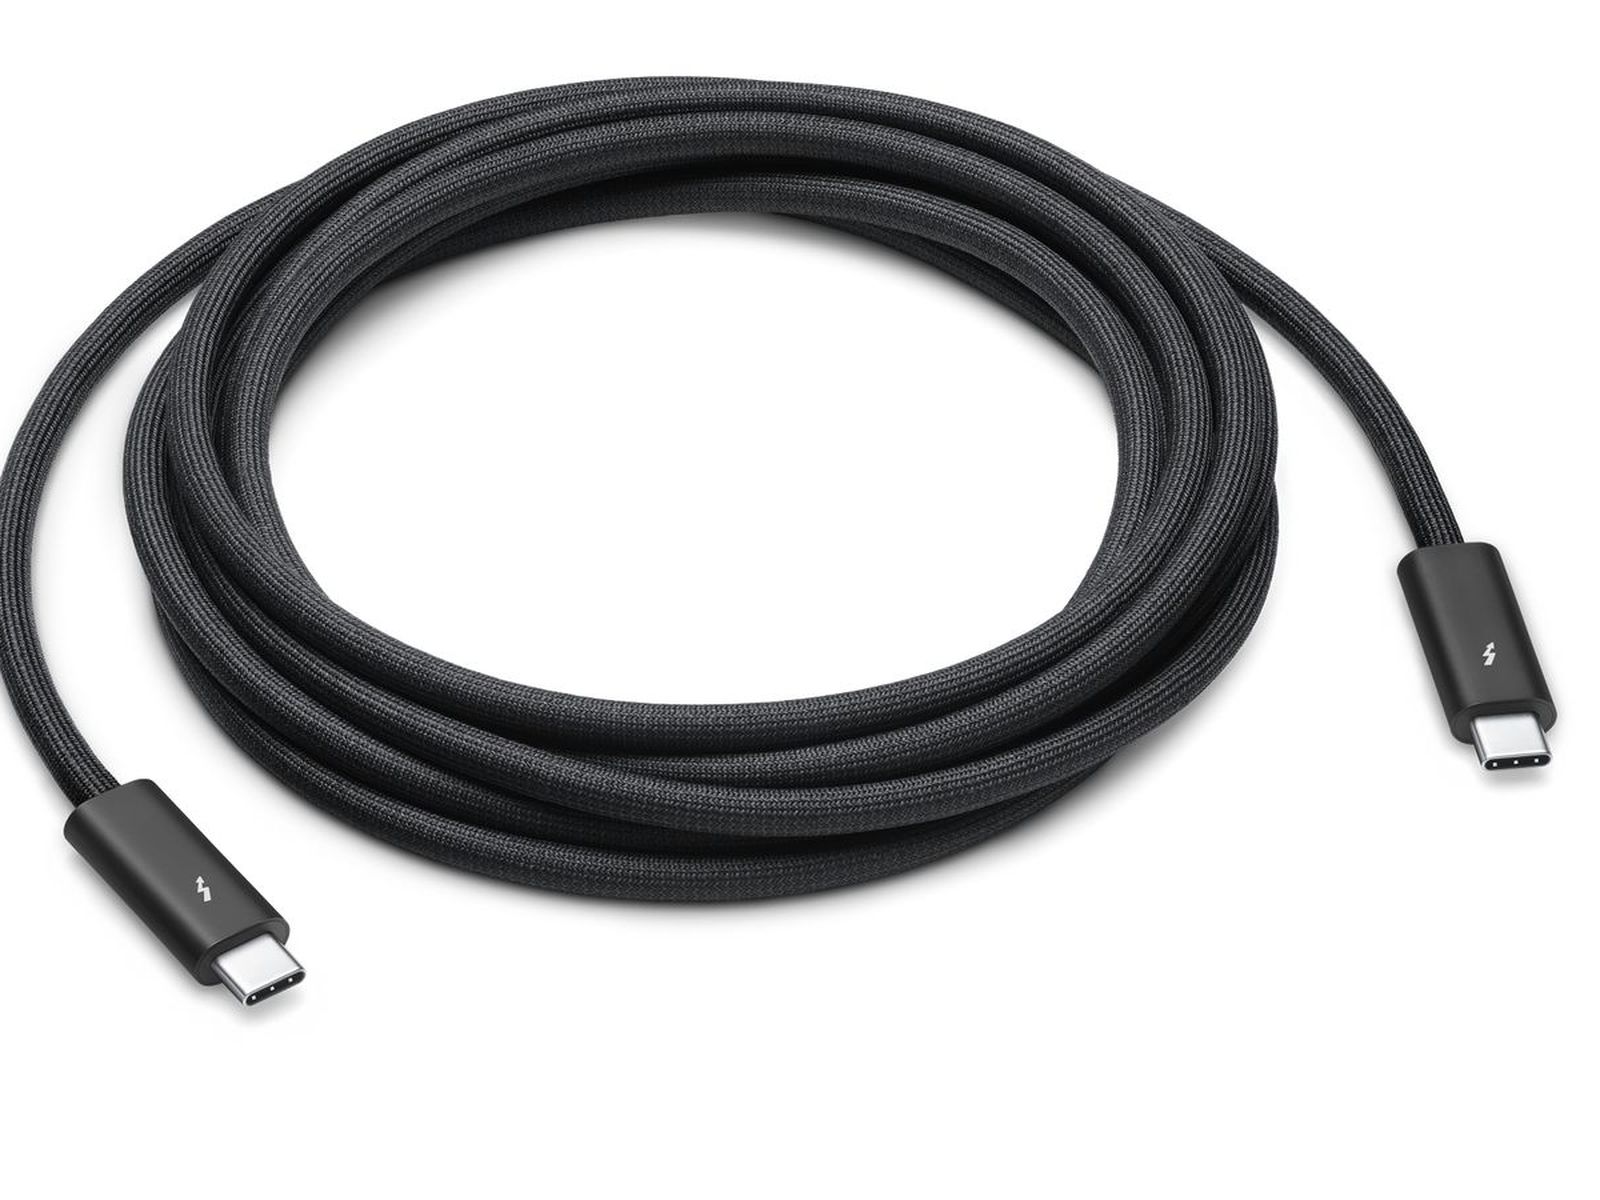 Apple Thunderbolt Cable - 2 meter